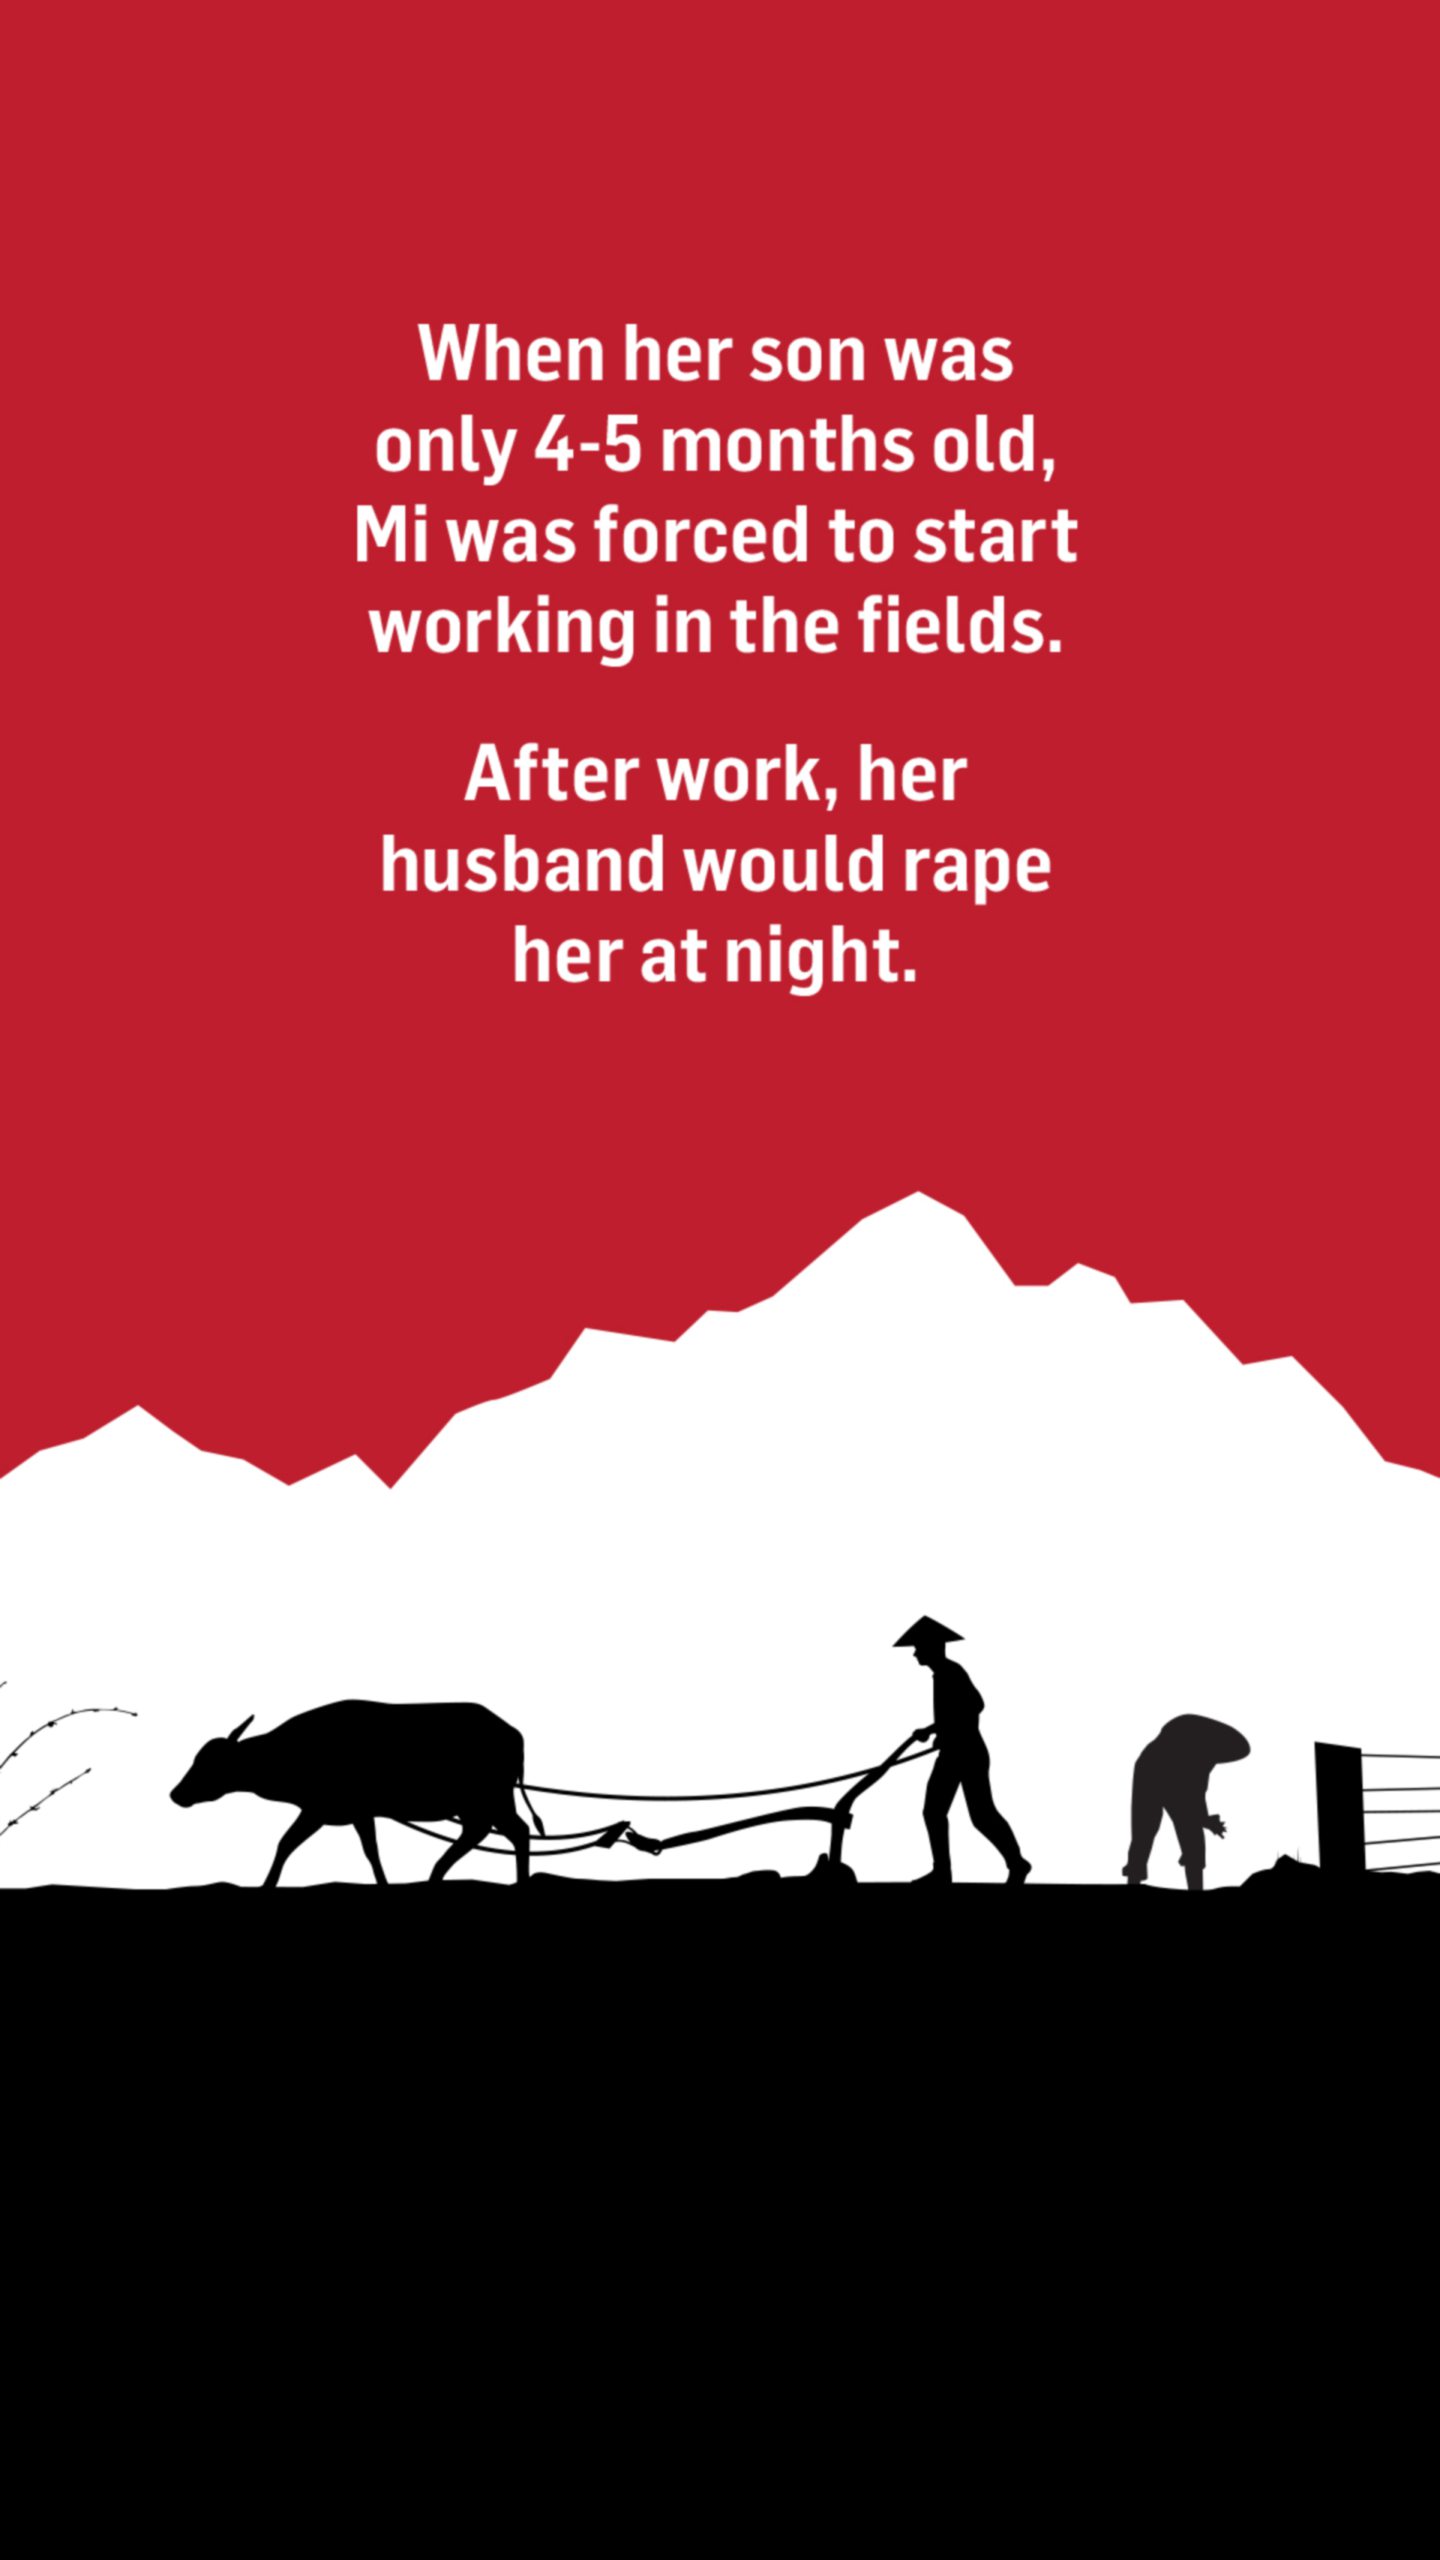 An illustration of people working in farm fields. Words above the image read: When her son was only four-five months old, Mi was forced to start working in the fields.

After work, her husband would rape her.